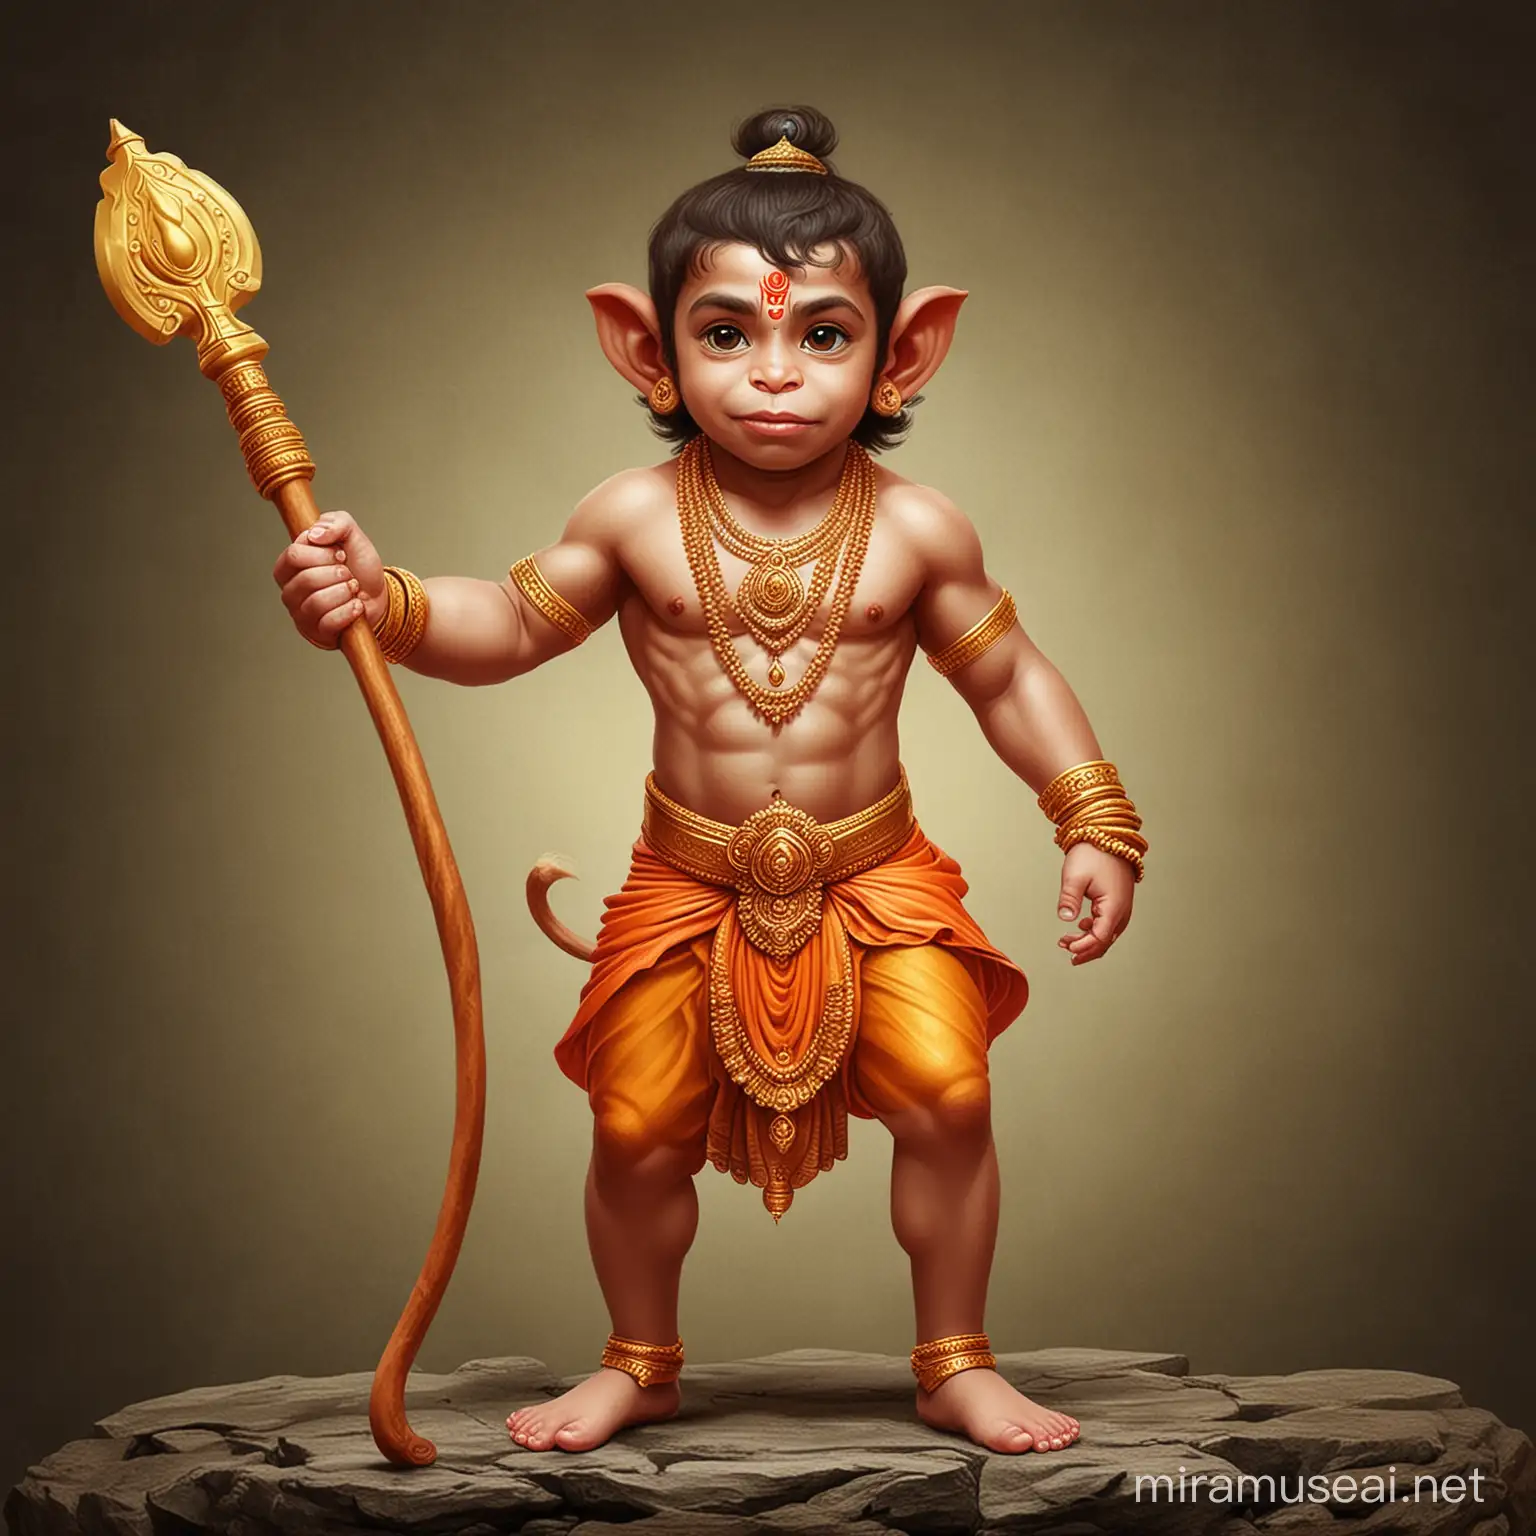 Adorable Depiction of Lord Hanuman as a Child